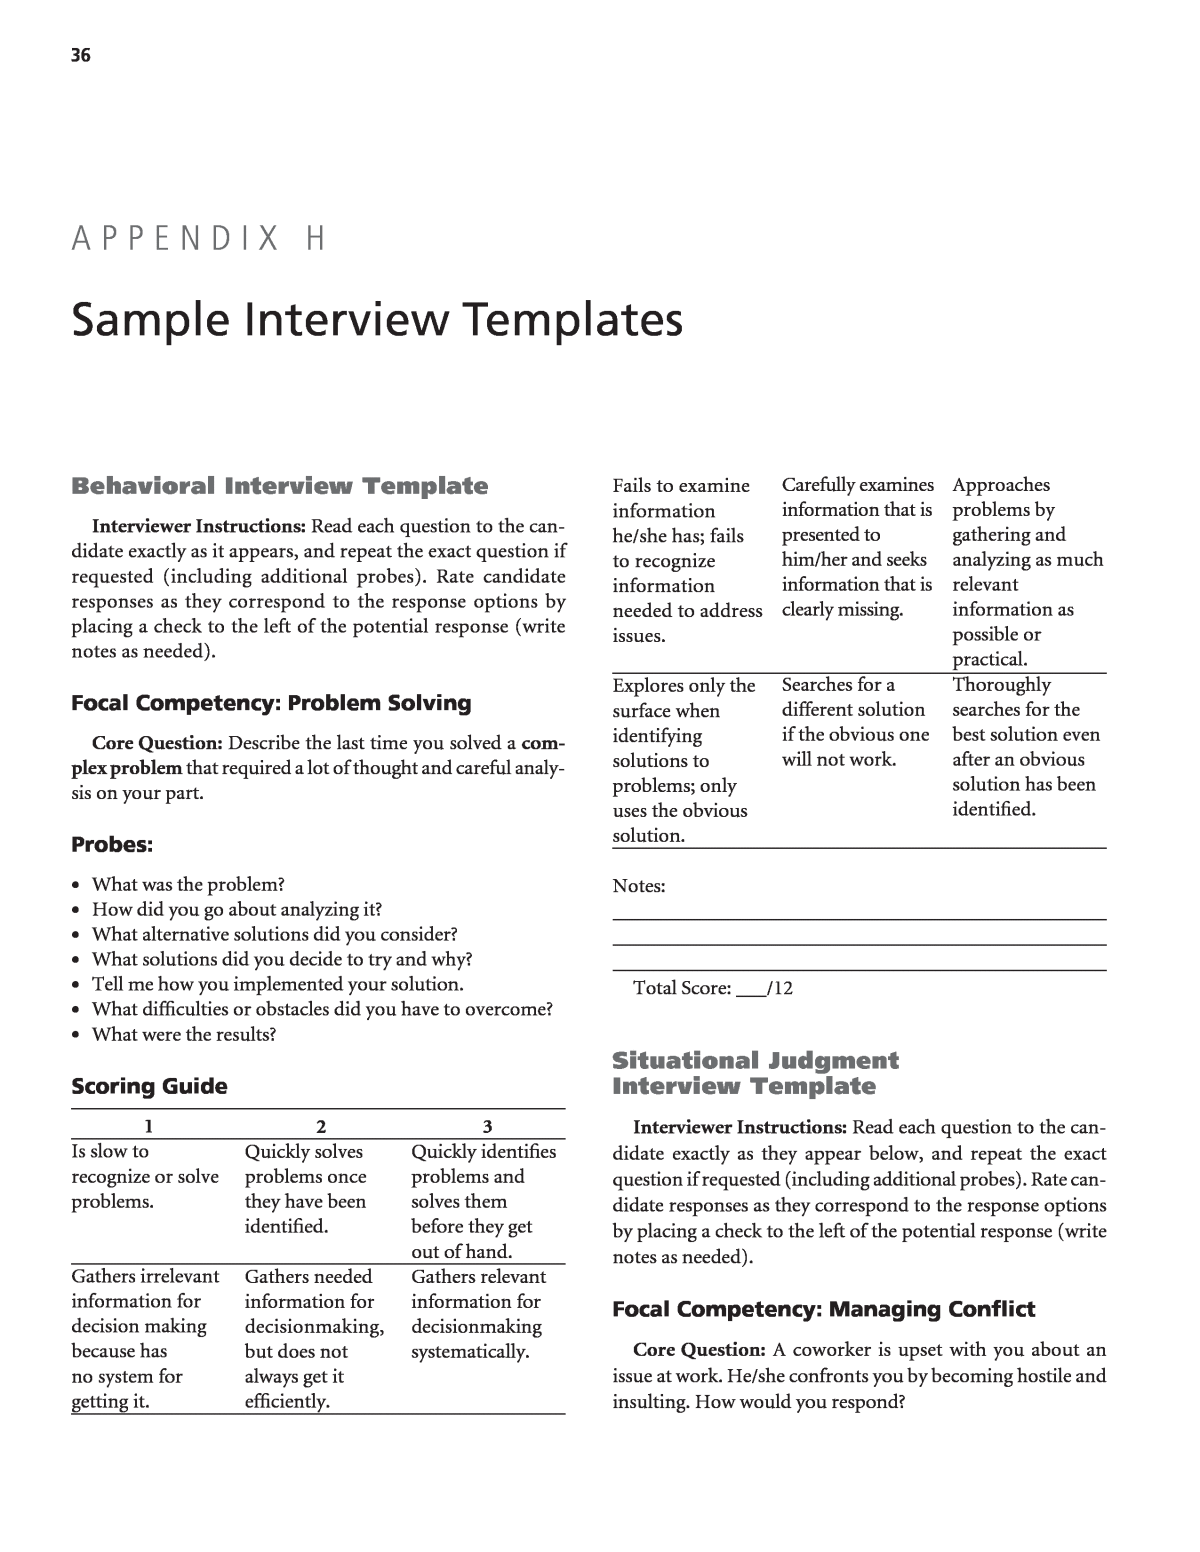 Sample Interview Form Template